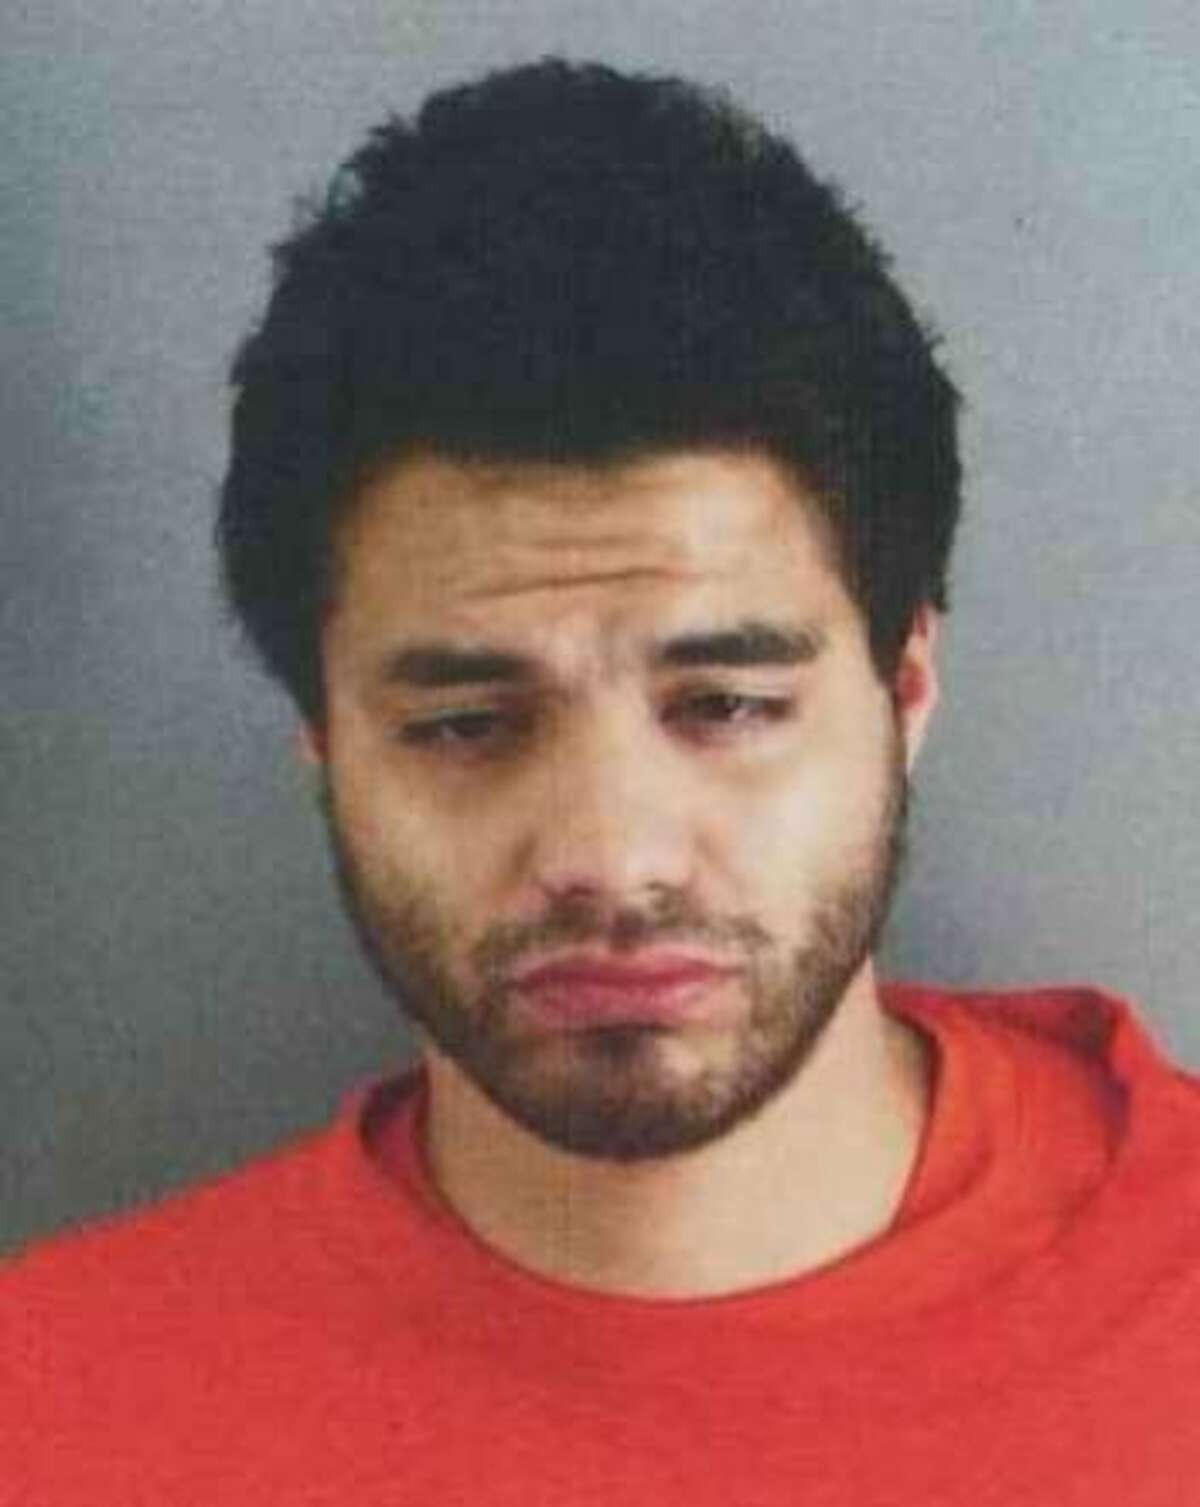 Mark Lugo, arrested on suspicion of stealing a Pablo Picasso pencil drawing from a San Francisco art gallery on July 5, 2011.